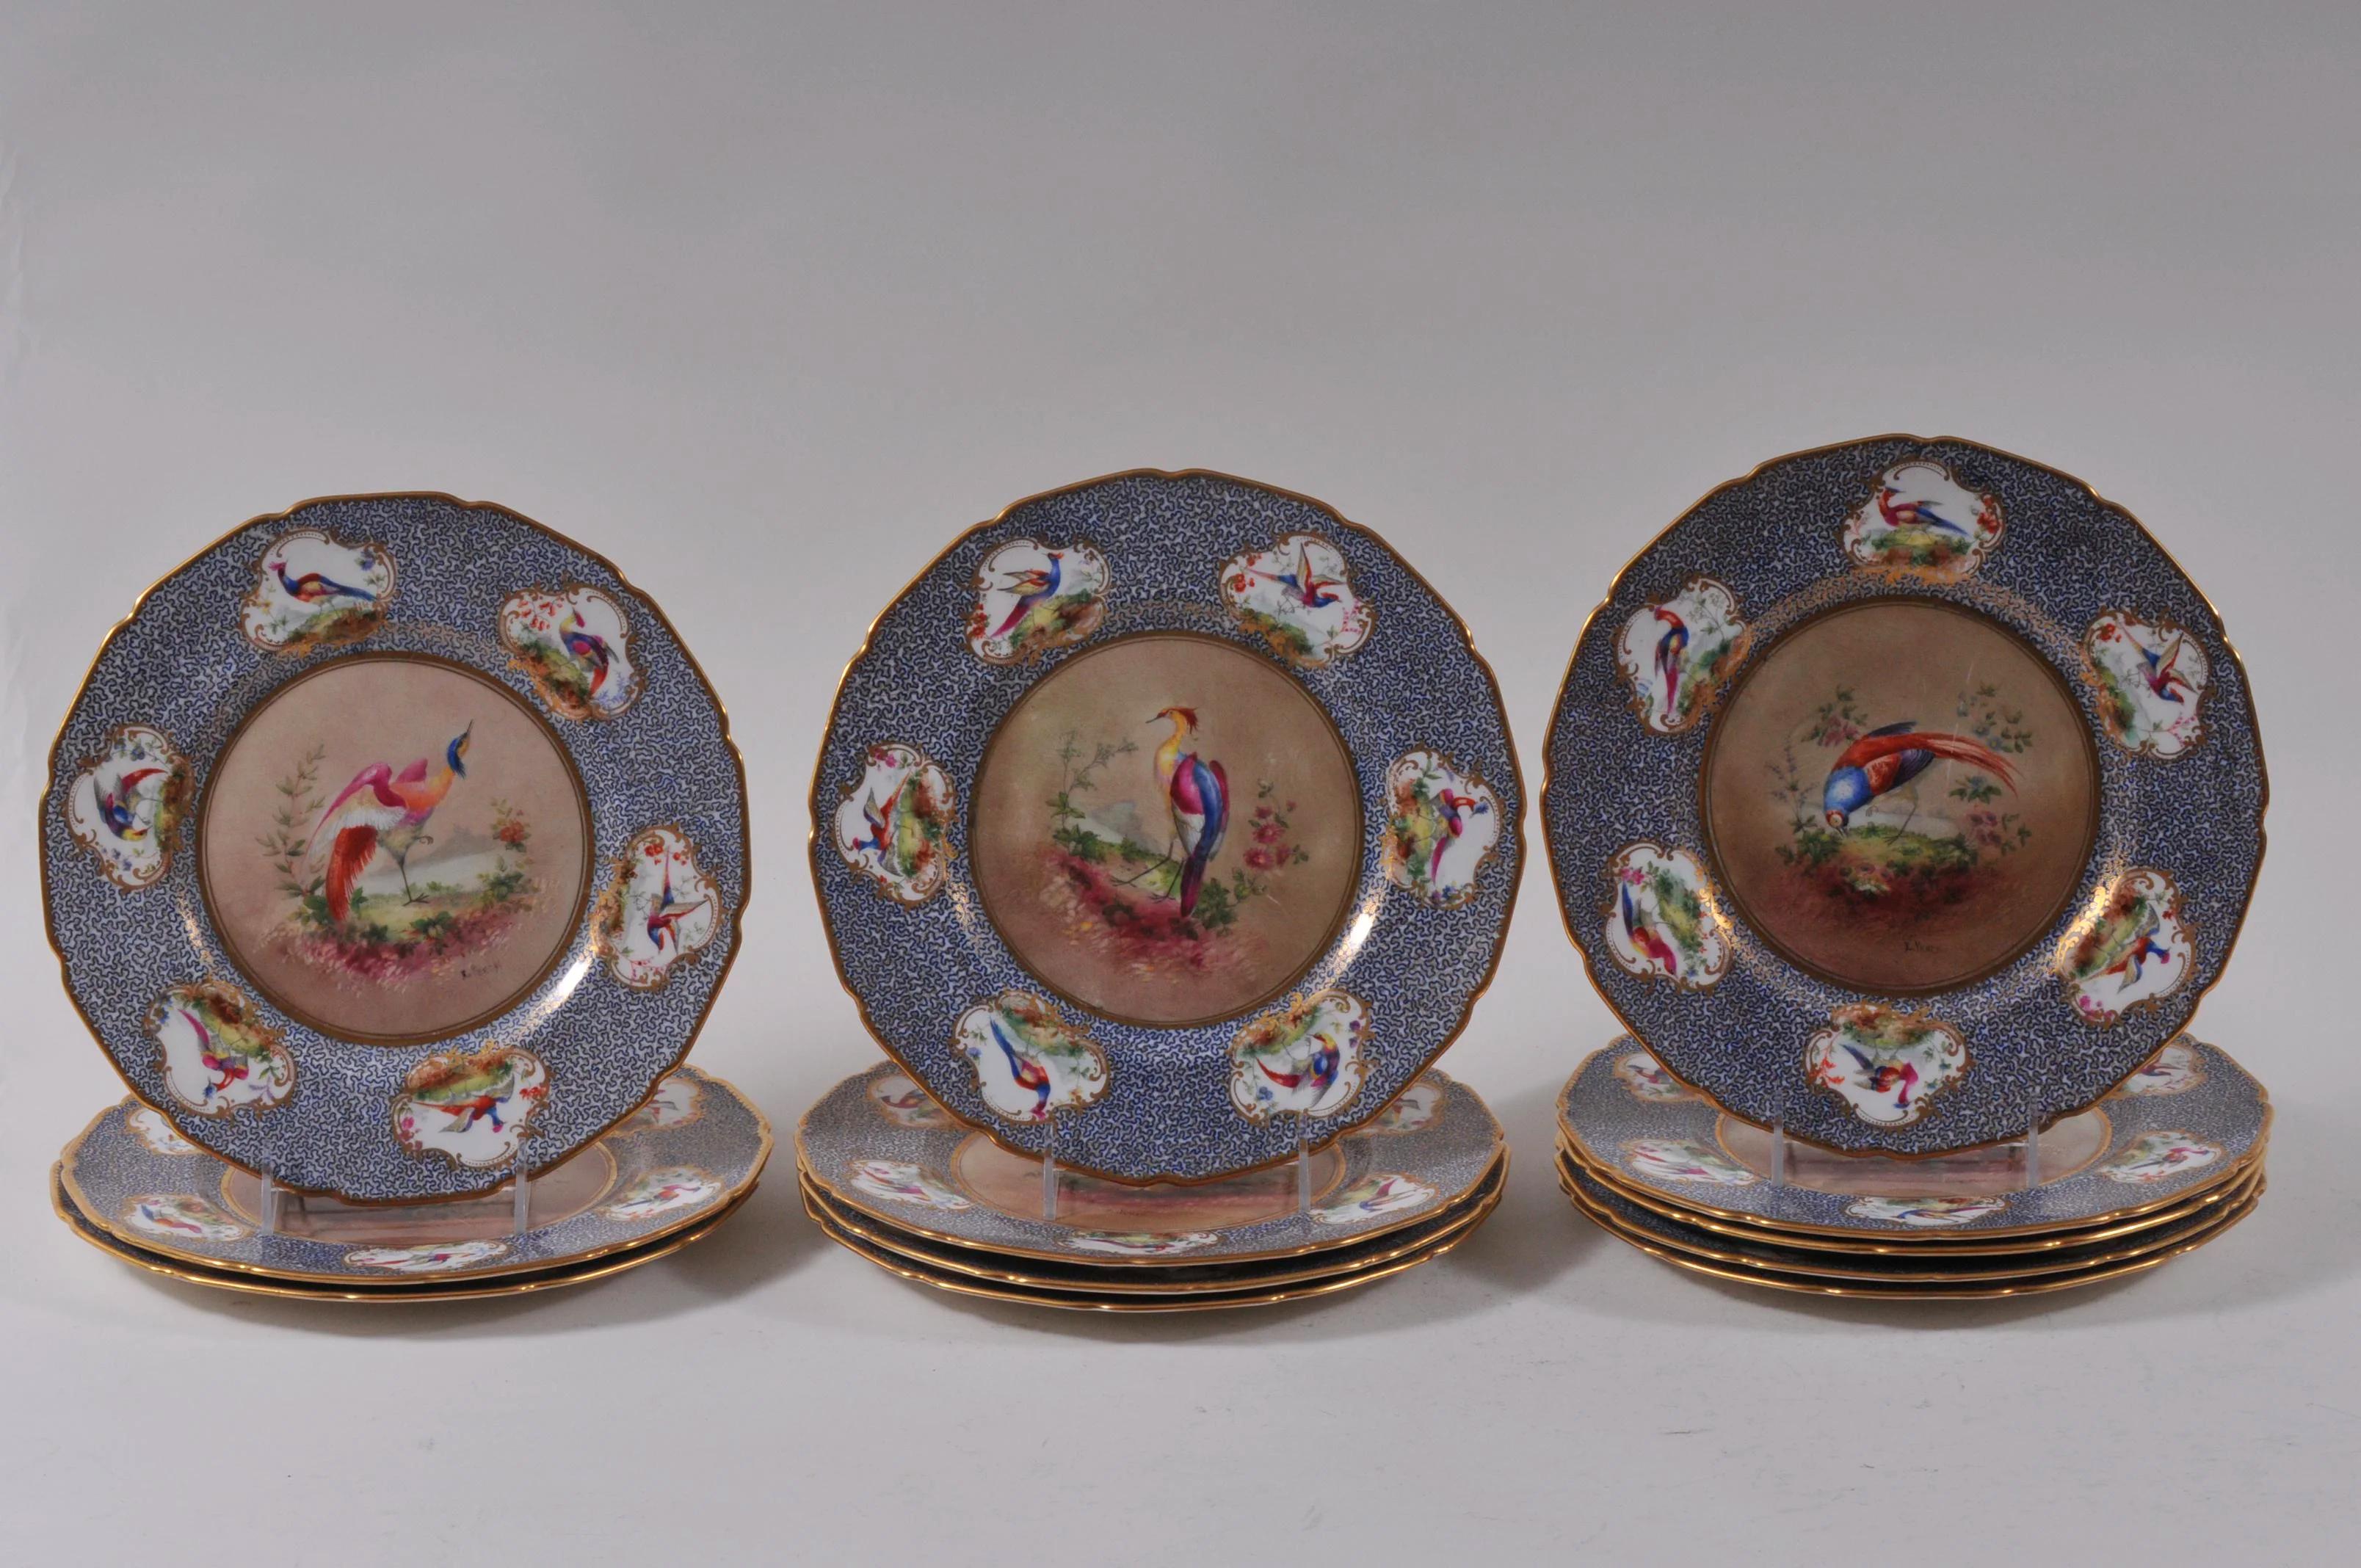 Set of twelve (six pairs) of Royal Doulton fine quality hand painted porcelain game plates decorated by E. Percy, dating from 1914. All-over decorated borders with six medallions of the game birds featured on the plate interiors. Ten are artist